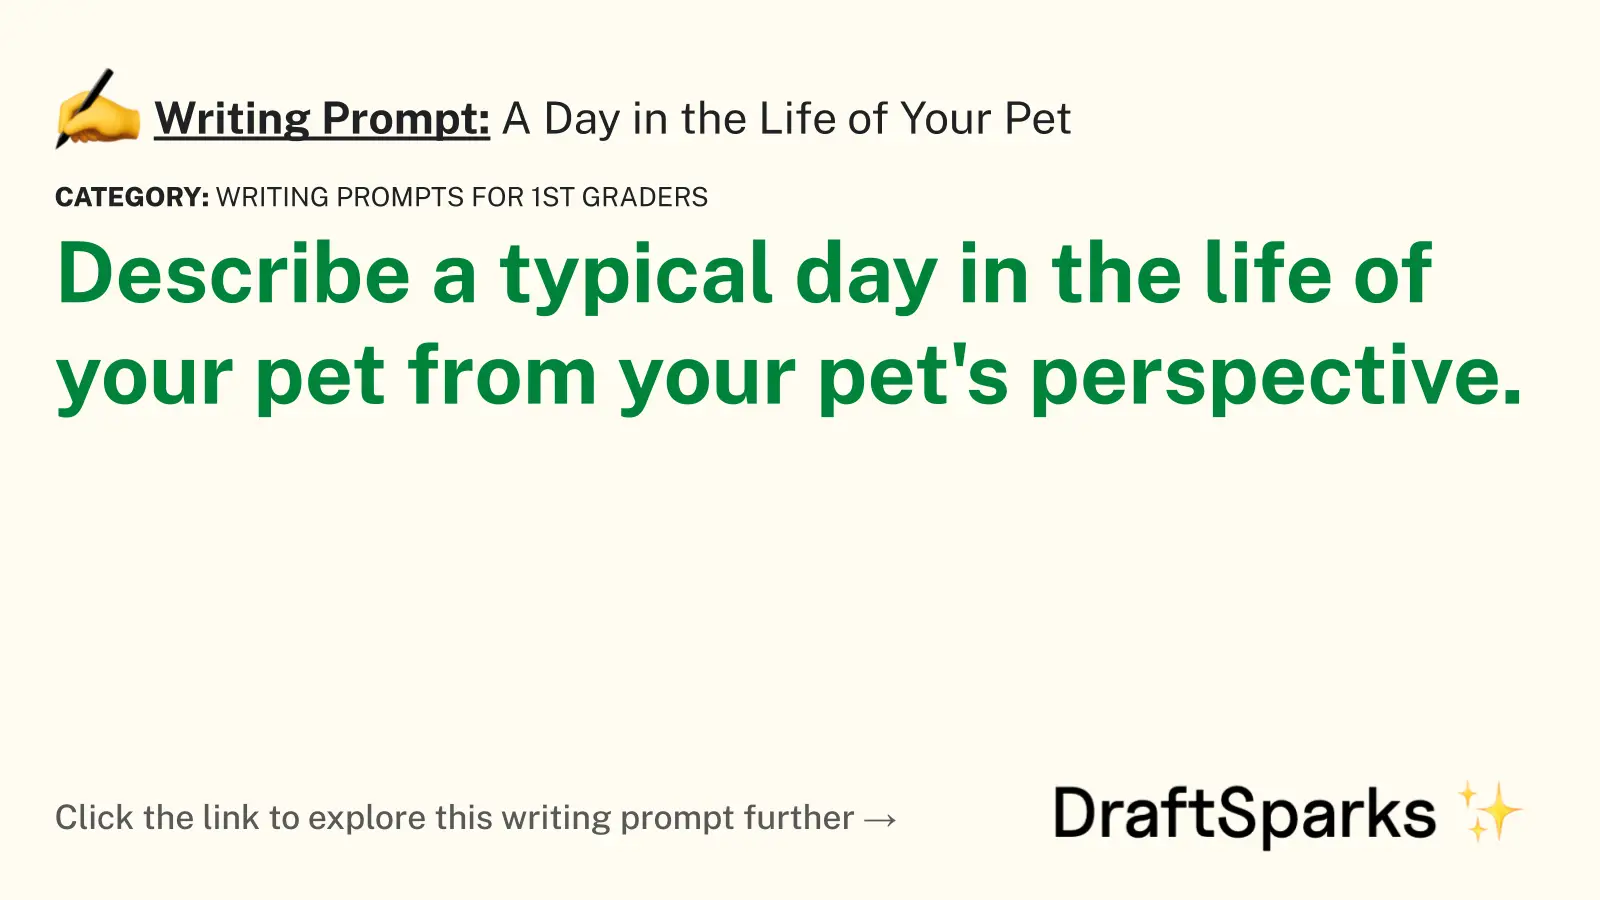 A Day in the Life of Your Pet